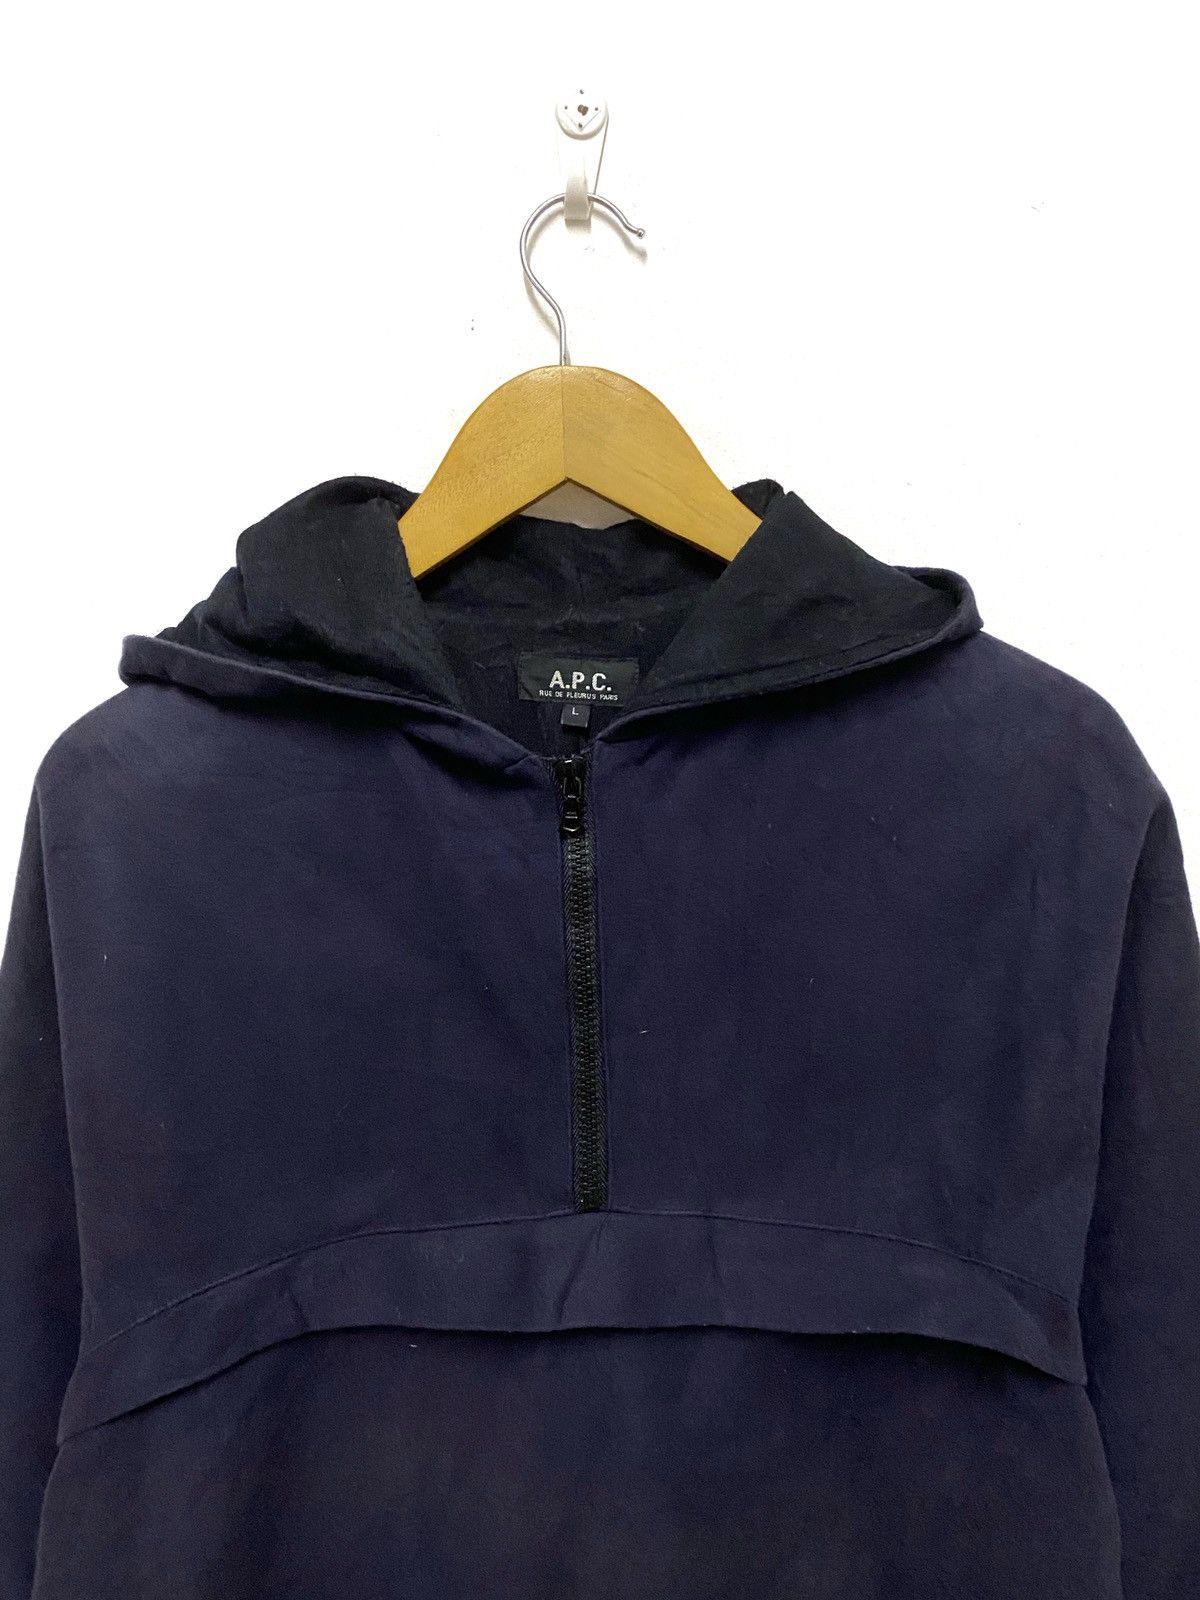 A.P.C Hoodie Made in France - 2